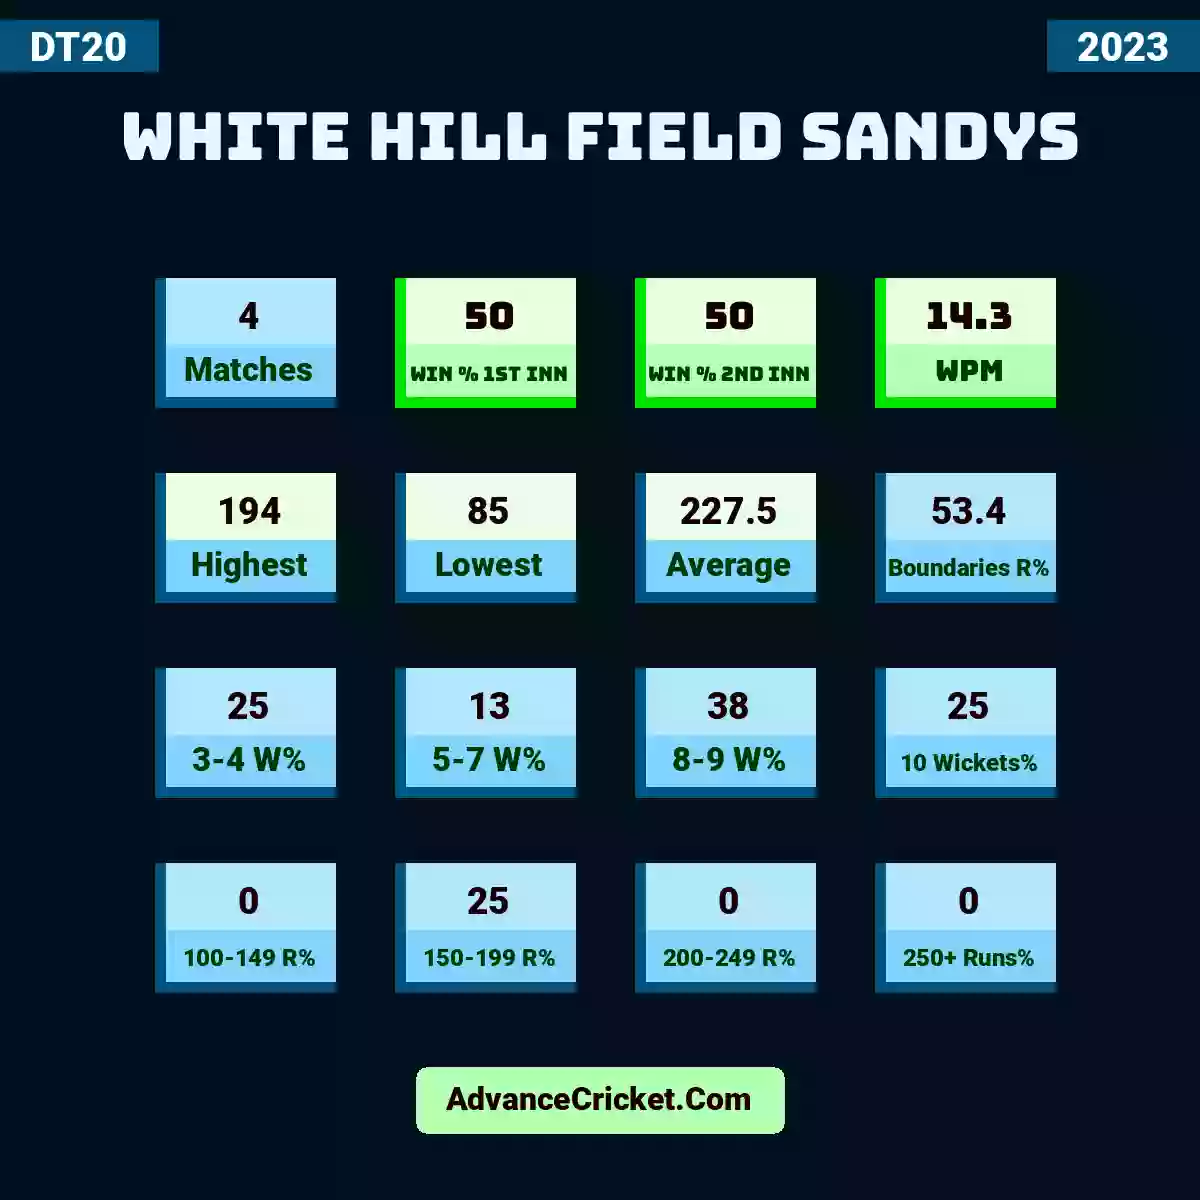 Image showing White Hill Field Sandys with Matches: 4, Win % 1st Inn: 50, Win % 2nd Inn: 50, WPM: 14.3, Highest: 194, Lowest: 85, Average: 227.5, Boundaries R%: 53.4, 3-4 W%: 25, 5-7 W%: 13, 8-9 W%: 38, 10 Wickets%: 25, 100-149 R%: 0, 150-199 R%: 25, 200-249 R%: 0, 250+ Runs%: 0.